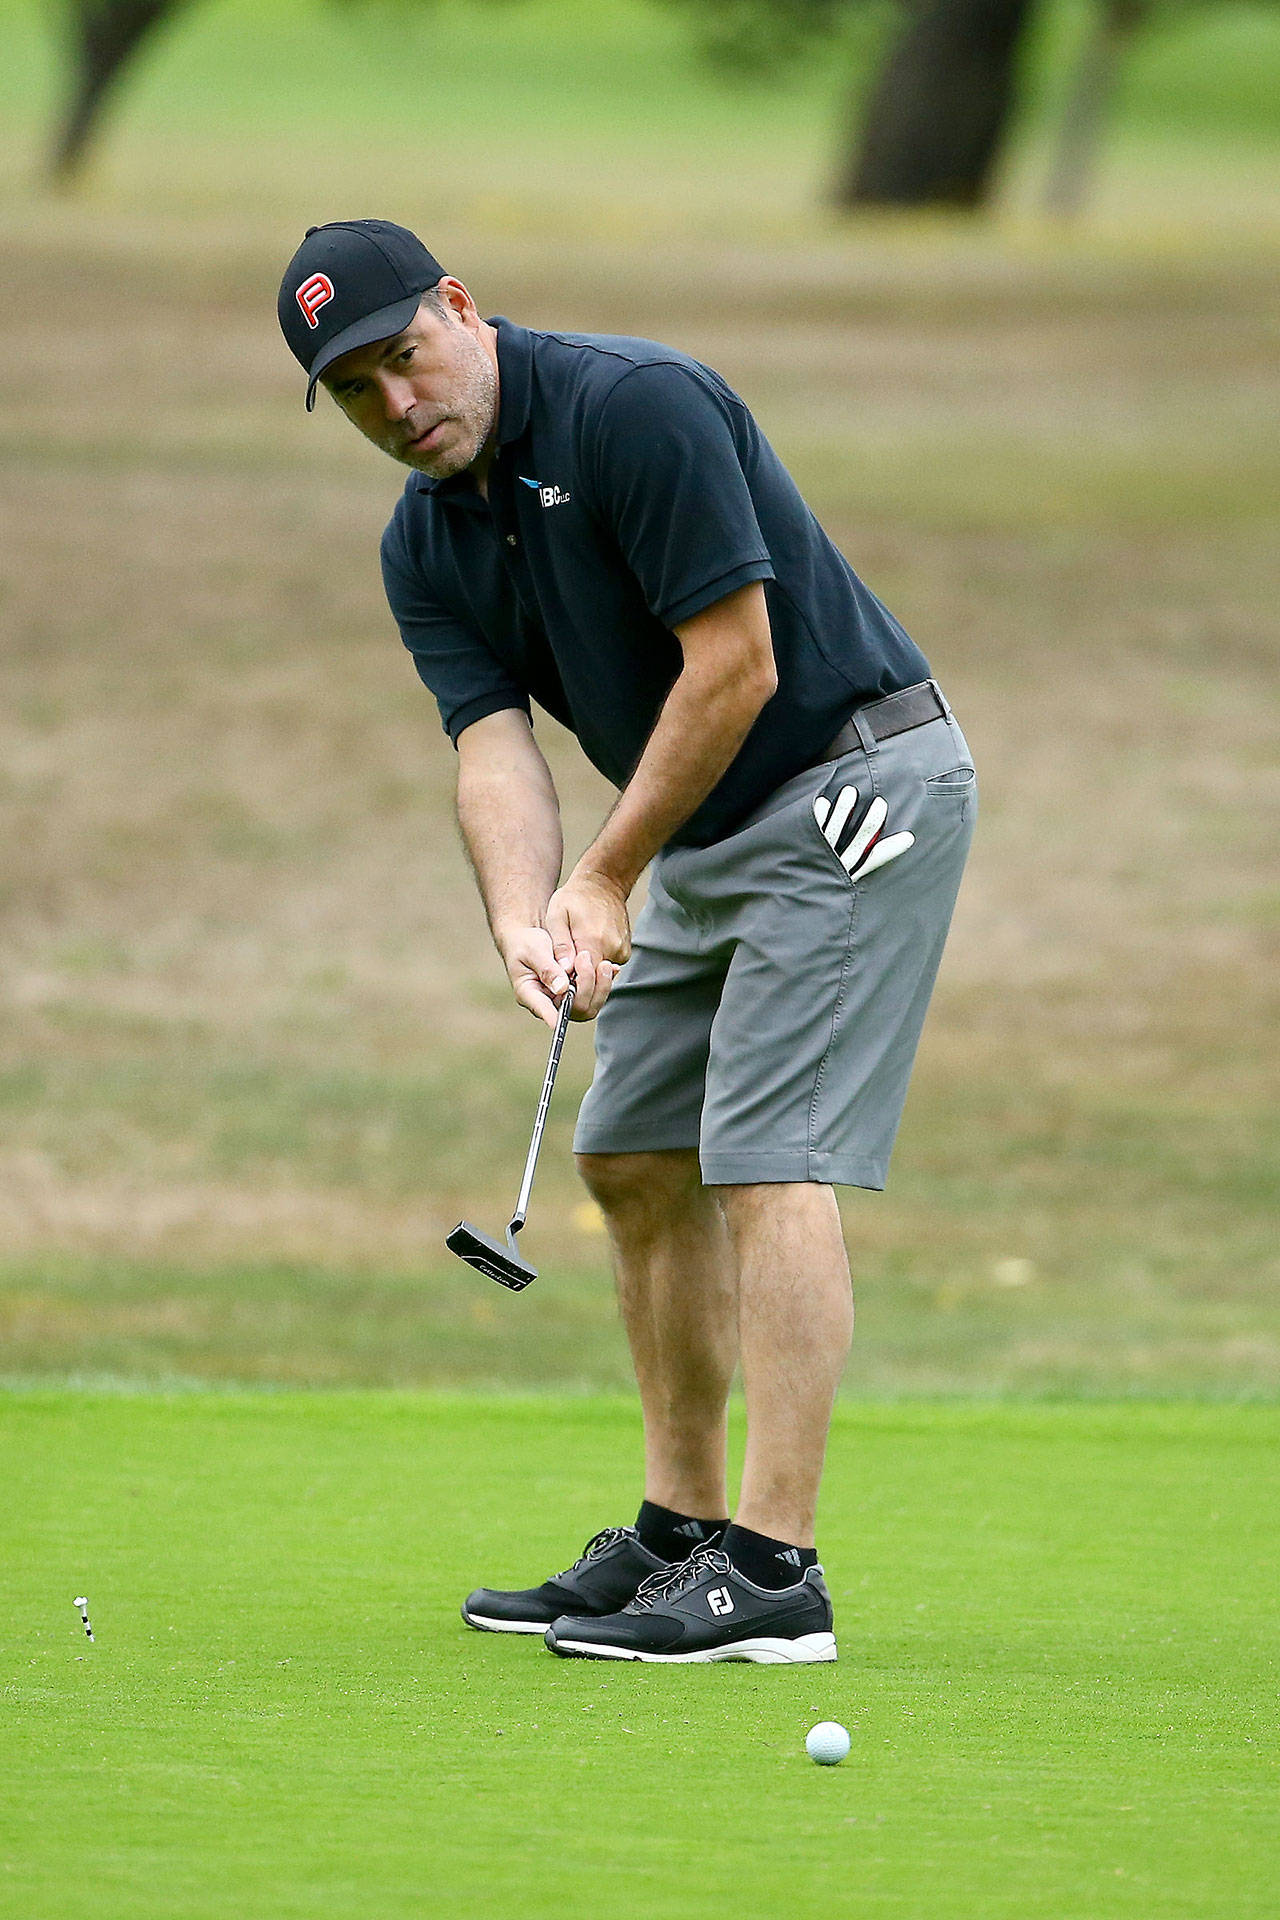 Marc Aparicio follows a putt as it heads to the hole in the Bennett Boyles Golf Tournament. Aparicio is one of the owners of the Penn Cove Brewing Company, which organized the event. (Photo by John Fisken)